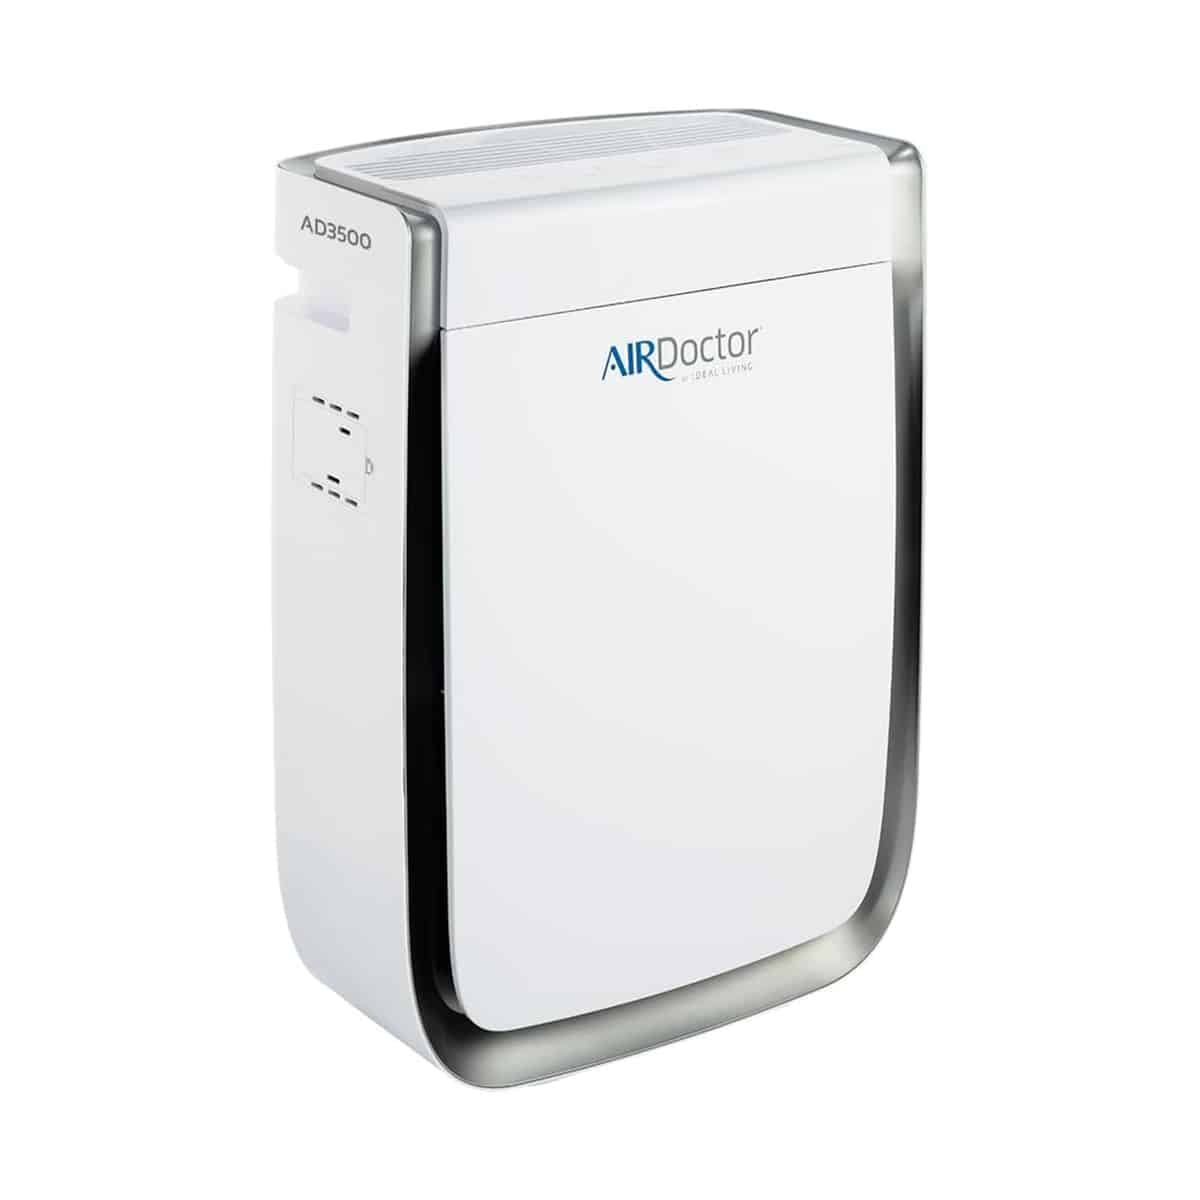 AIRDoctor 3500 Air Purifier (not the wifi model)